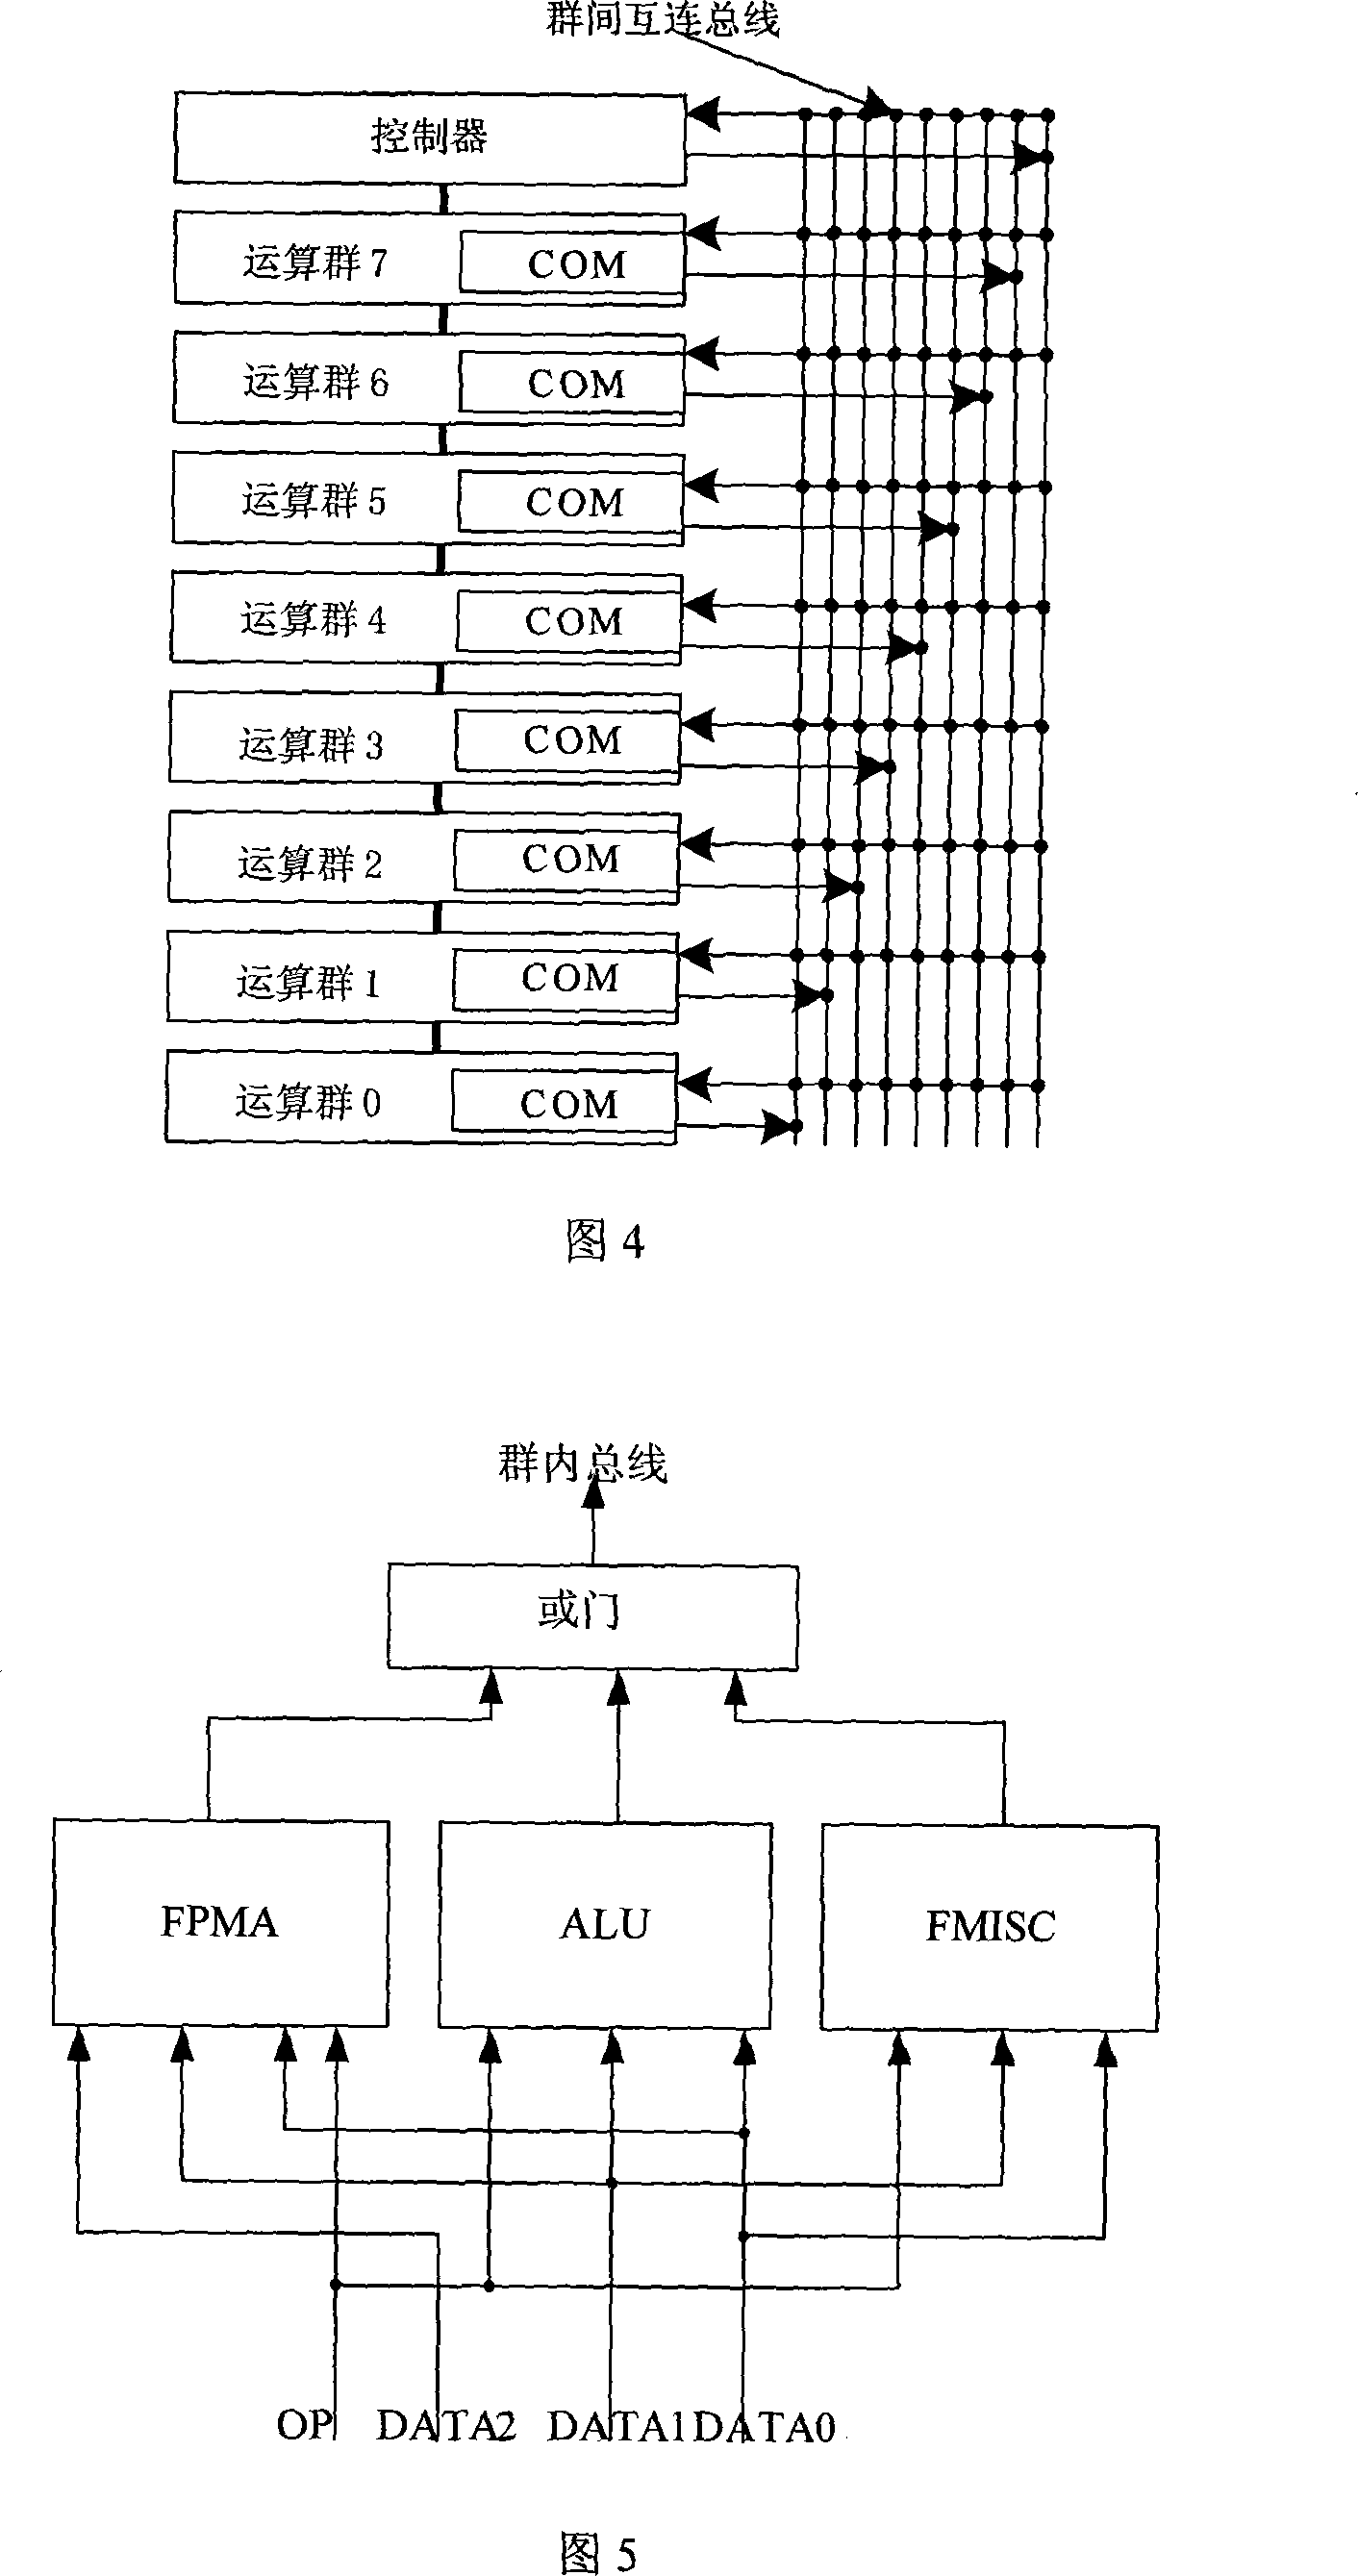 64 bit floating-point integer amalgamated arithmetic group capable of supporting local register and conditional execution